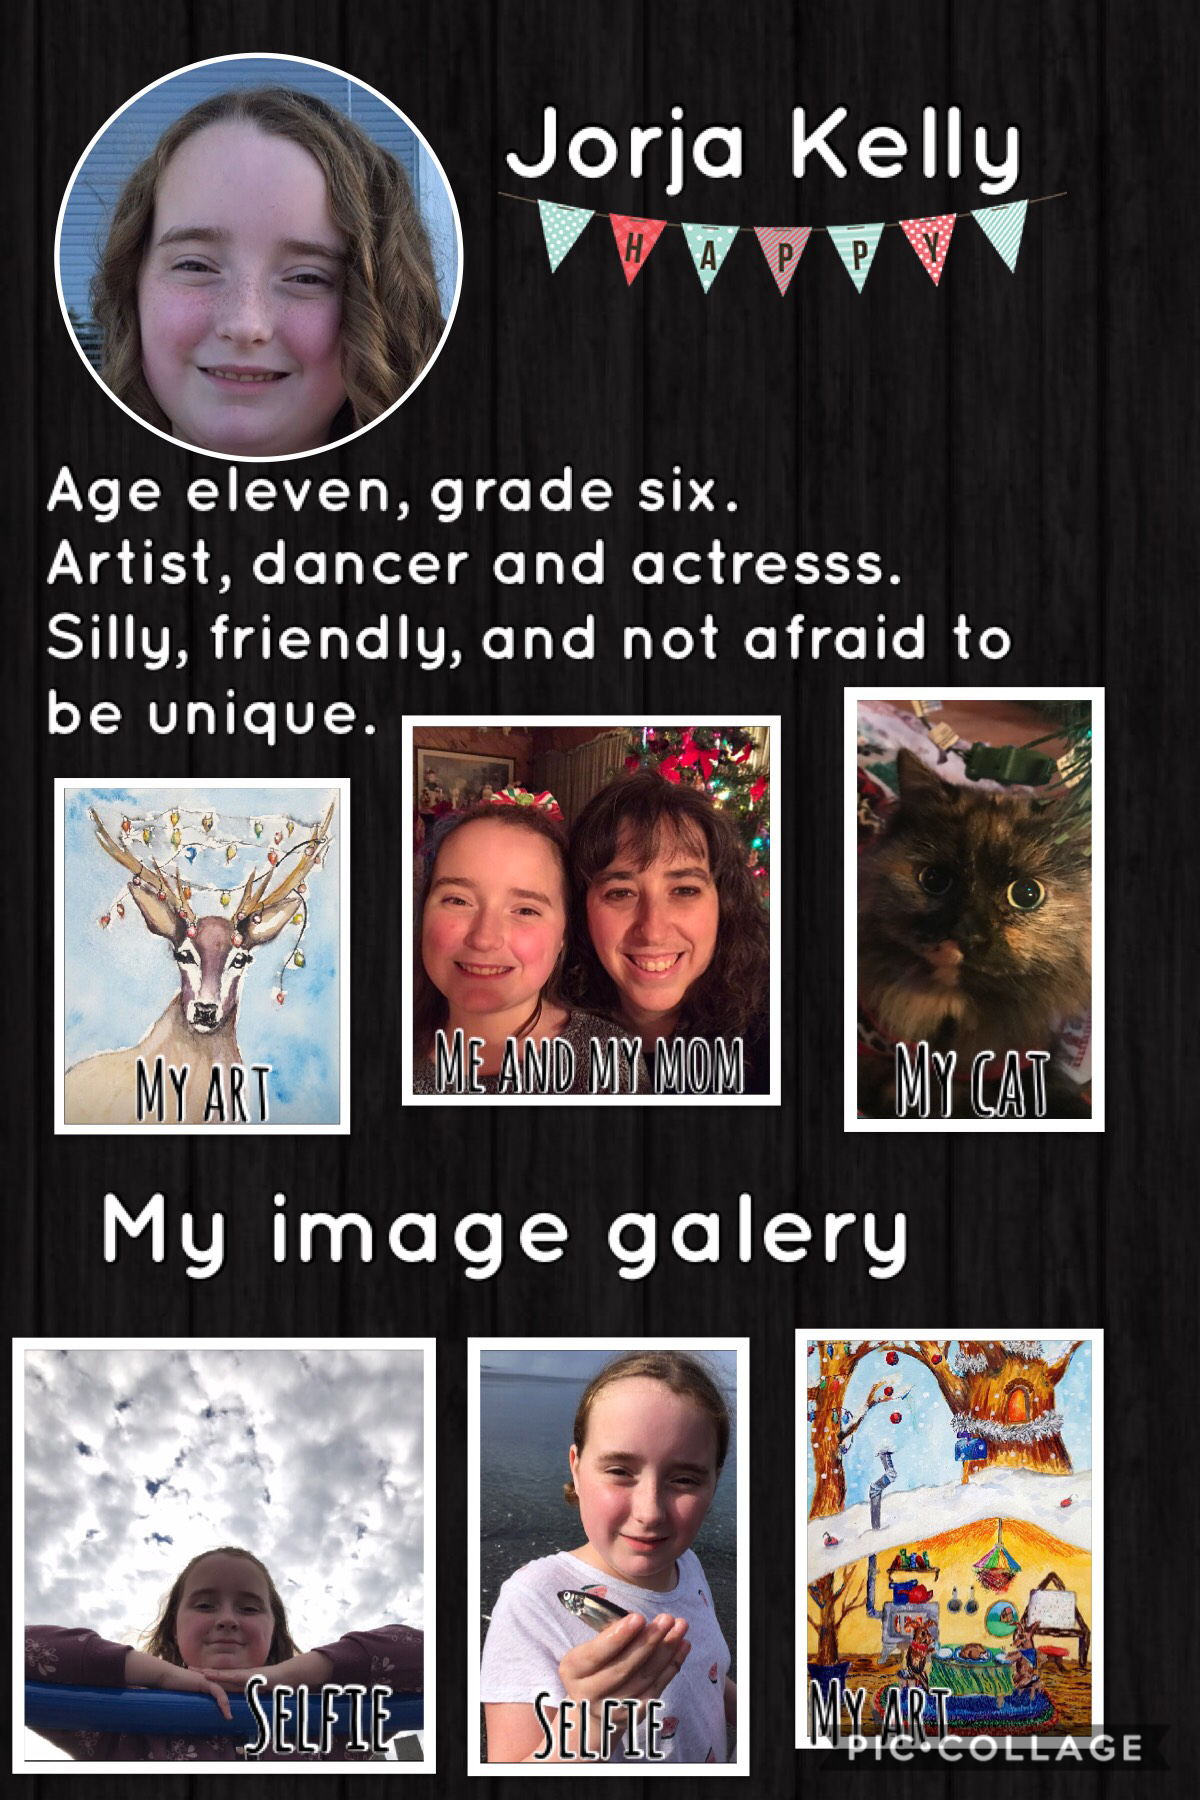 A little about me! Mt profile with a bio and some pictures of me, my art and my family.